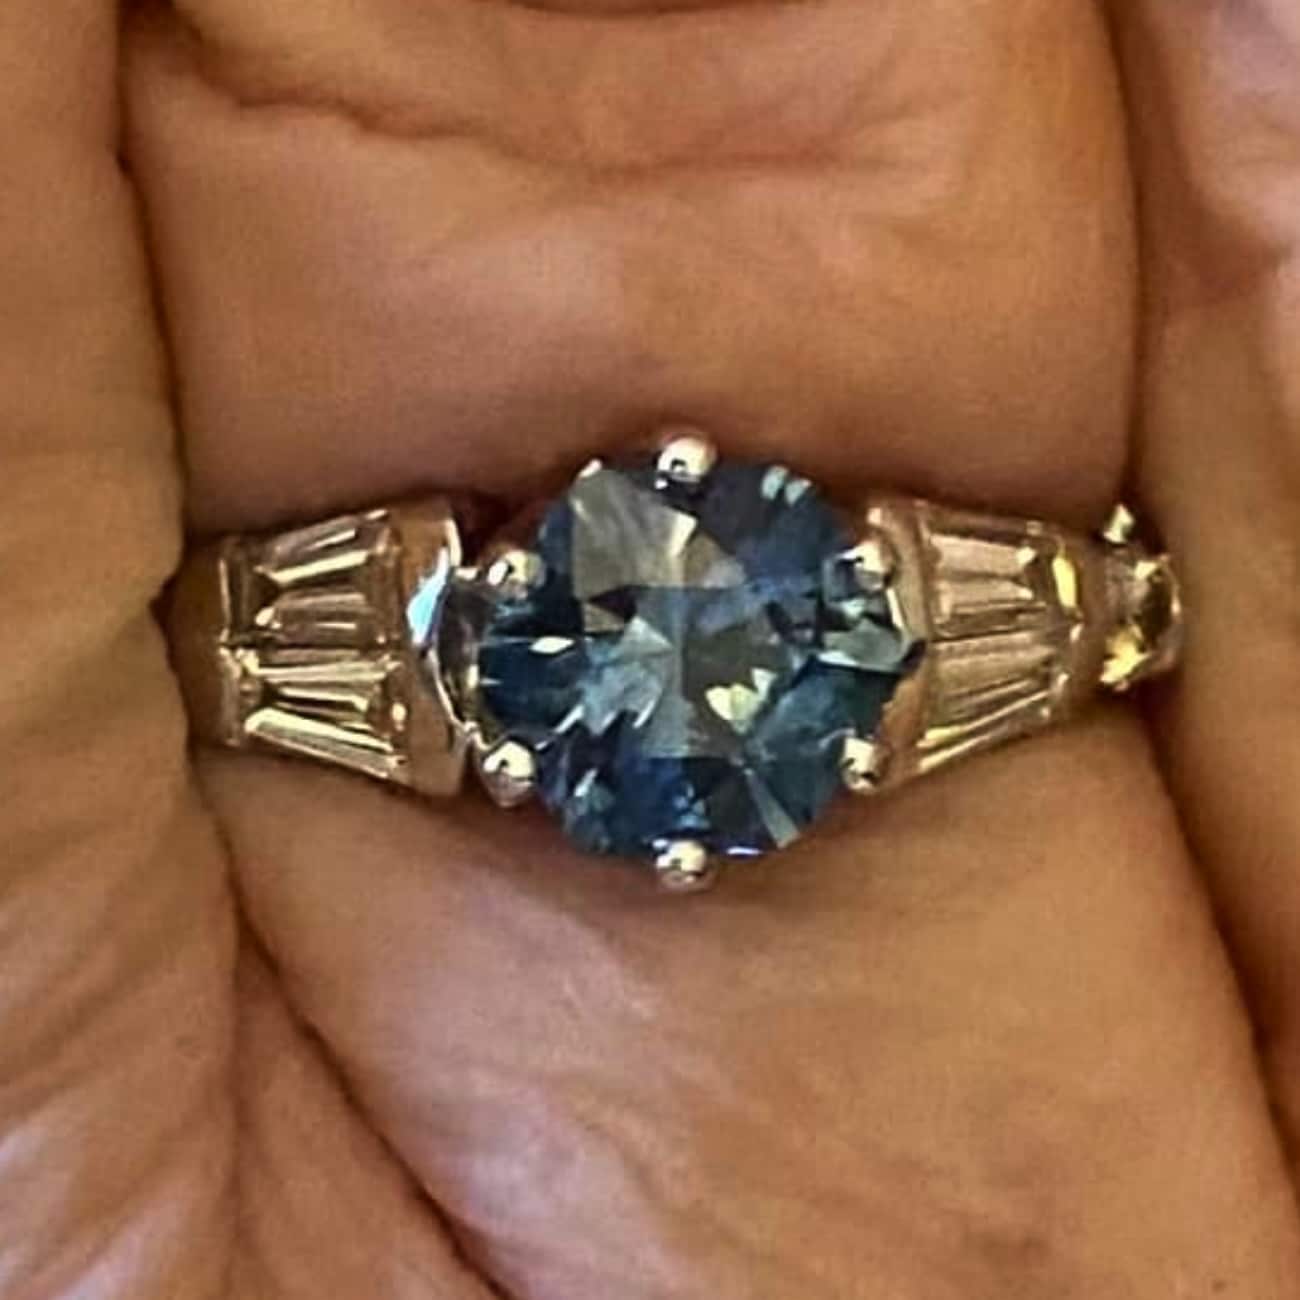 A ring not made by Earth's Treasury featuring a Montana sapphire